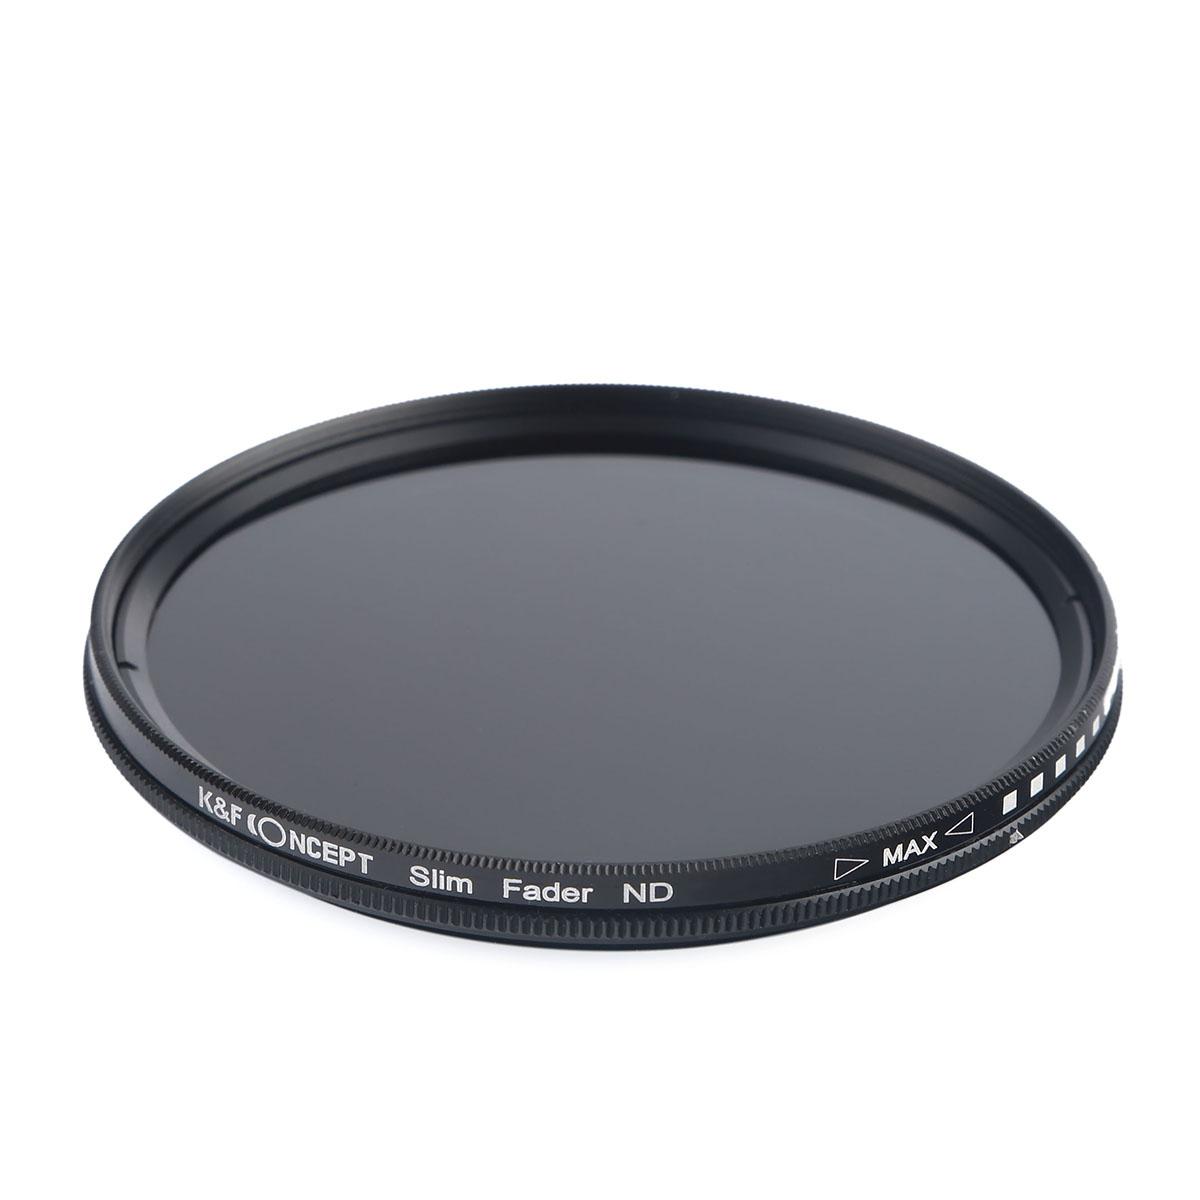 49mm filtro ND variable nd2-nd400 /& 52mm objetivamente tapa lens cap